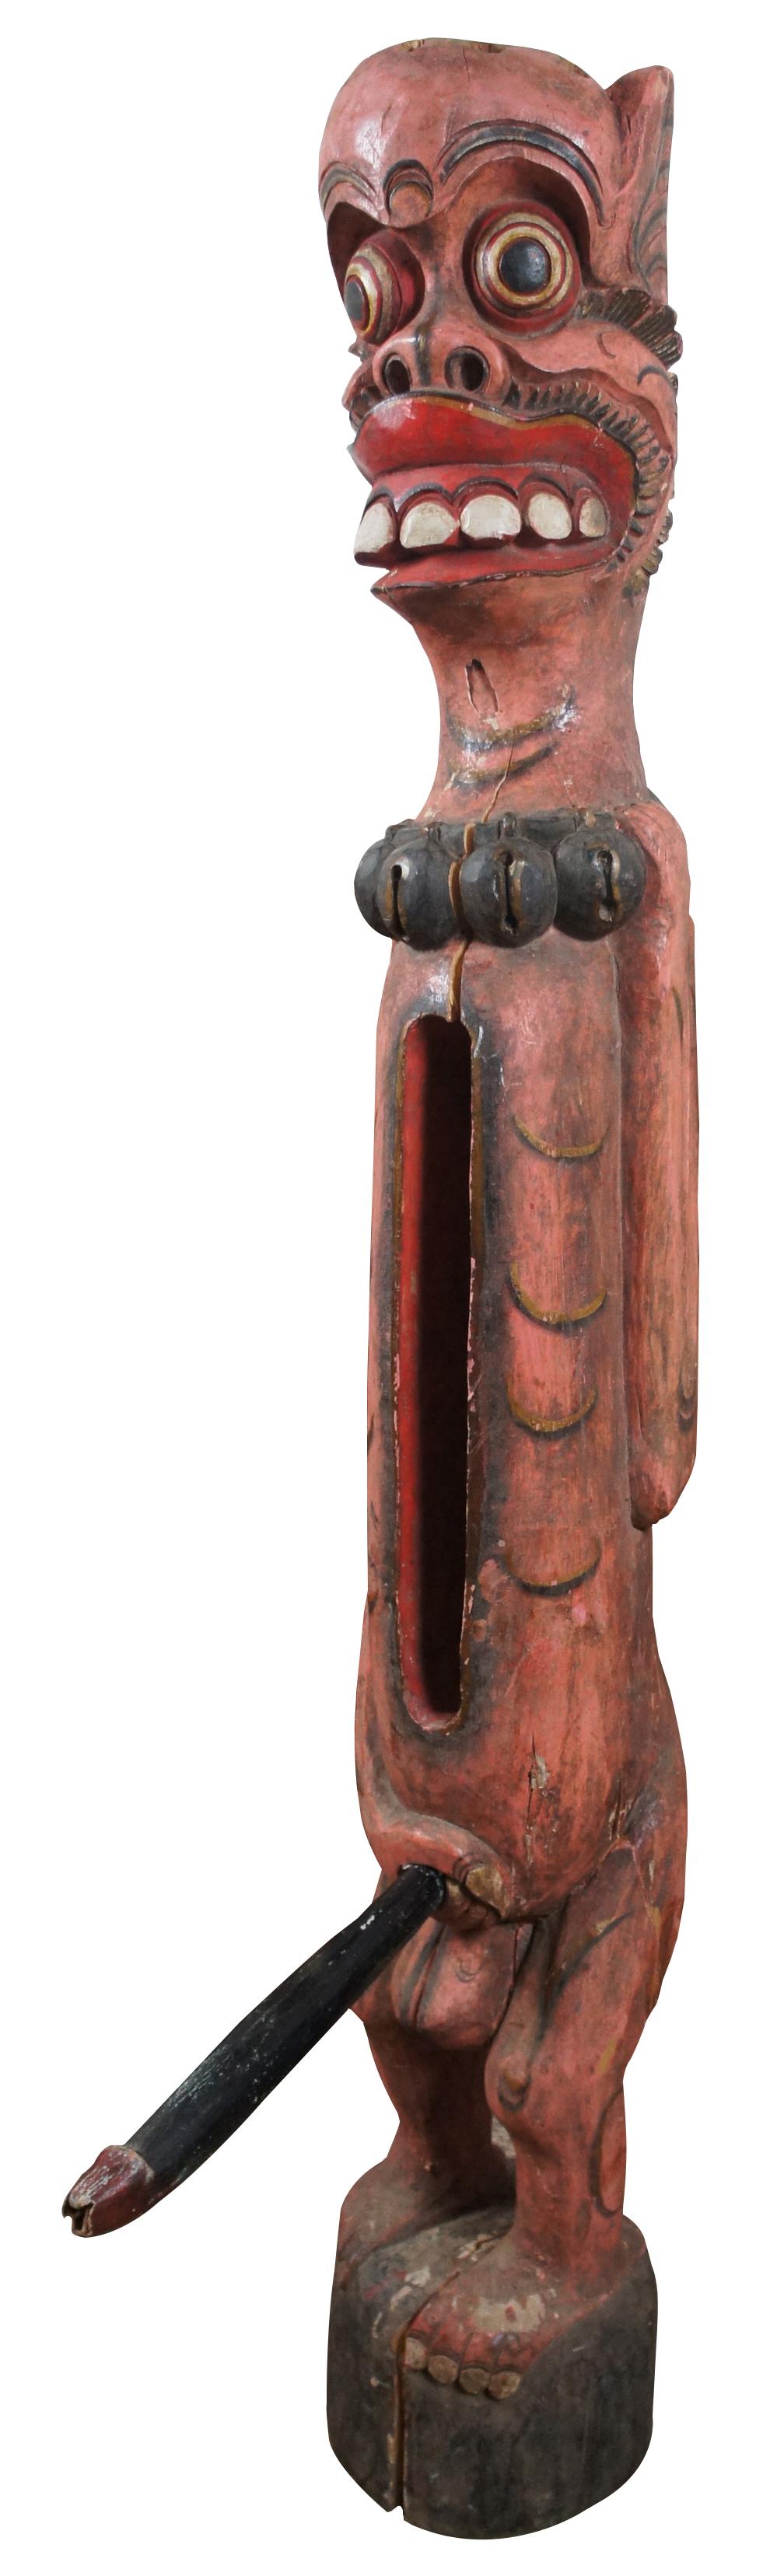 Vintage Indonesian hand carved wooden slit drum / tribal fertility figure painted in red and black with bells around it's neck and open space in the torso to store the detachable phallus / penis.

Mesures : 8